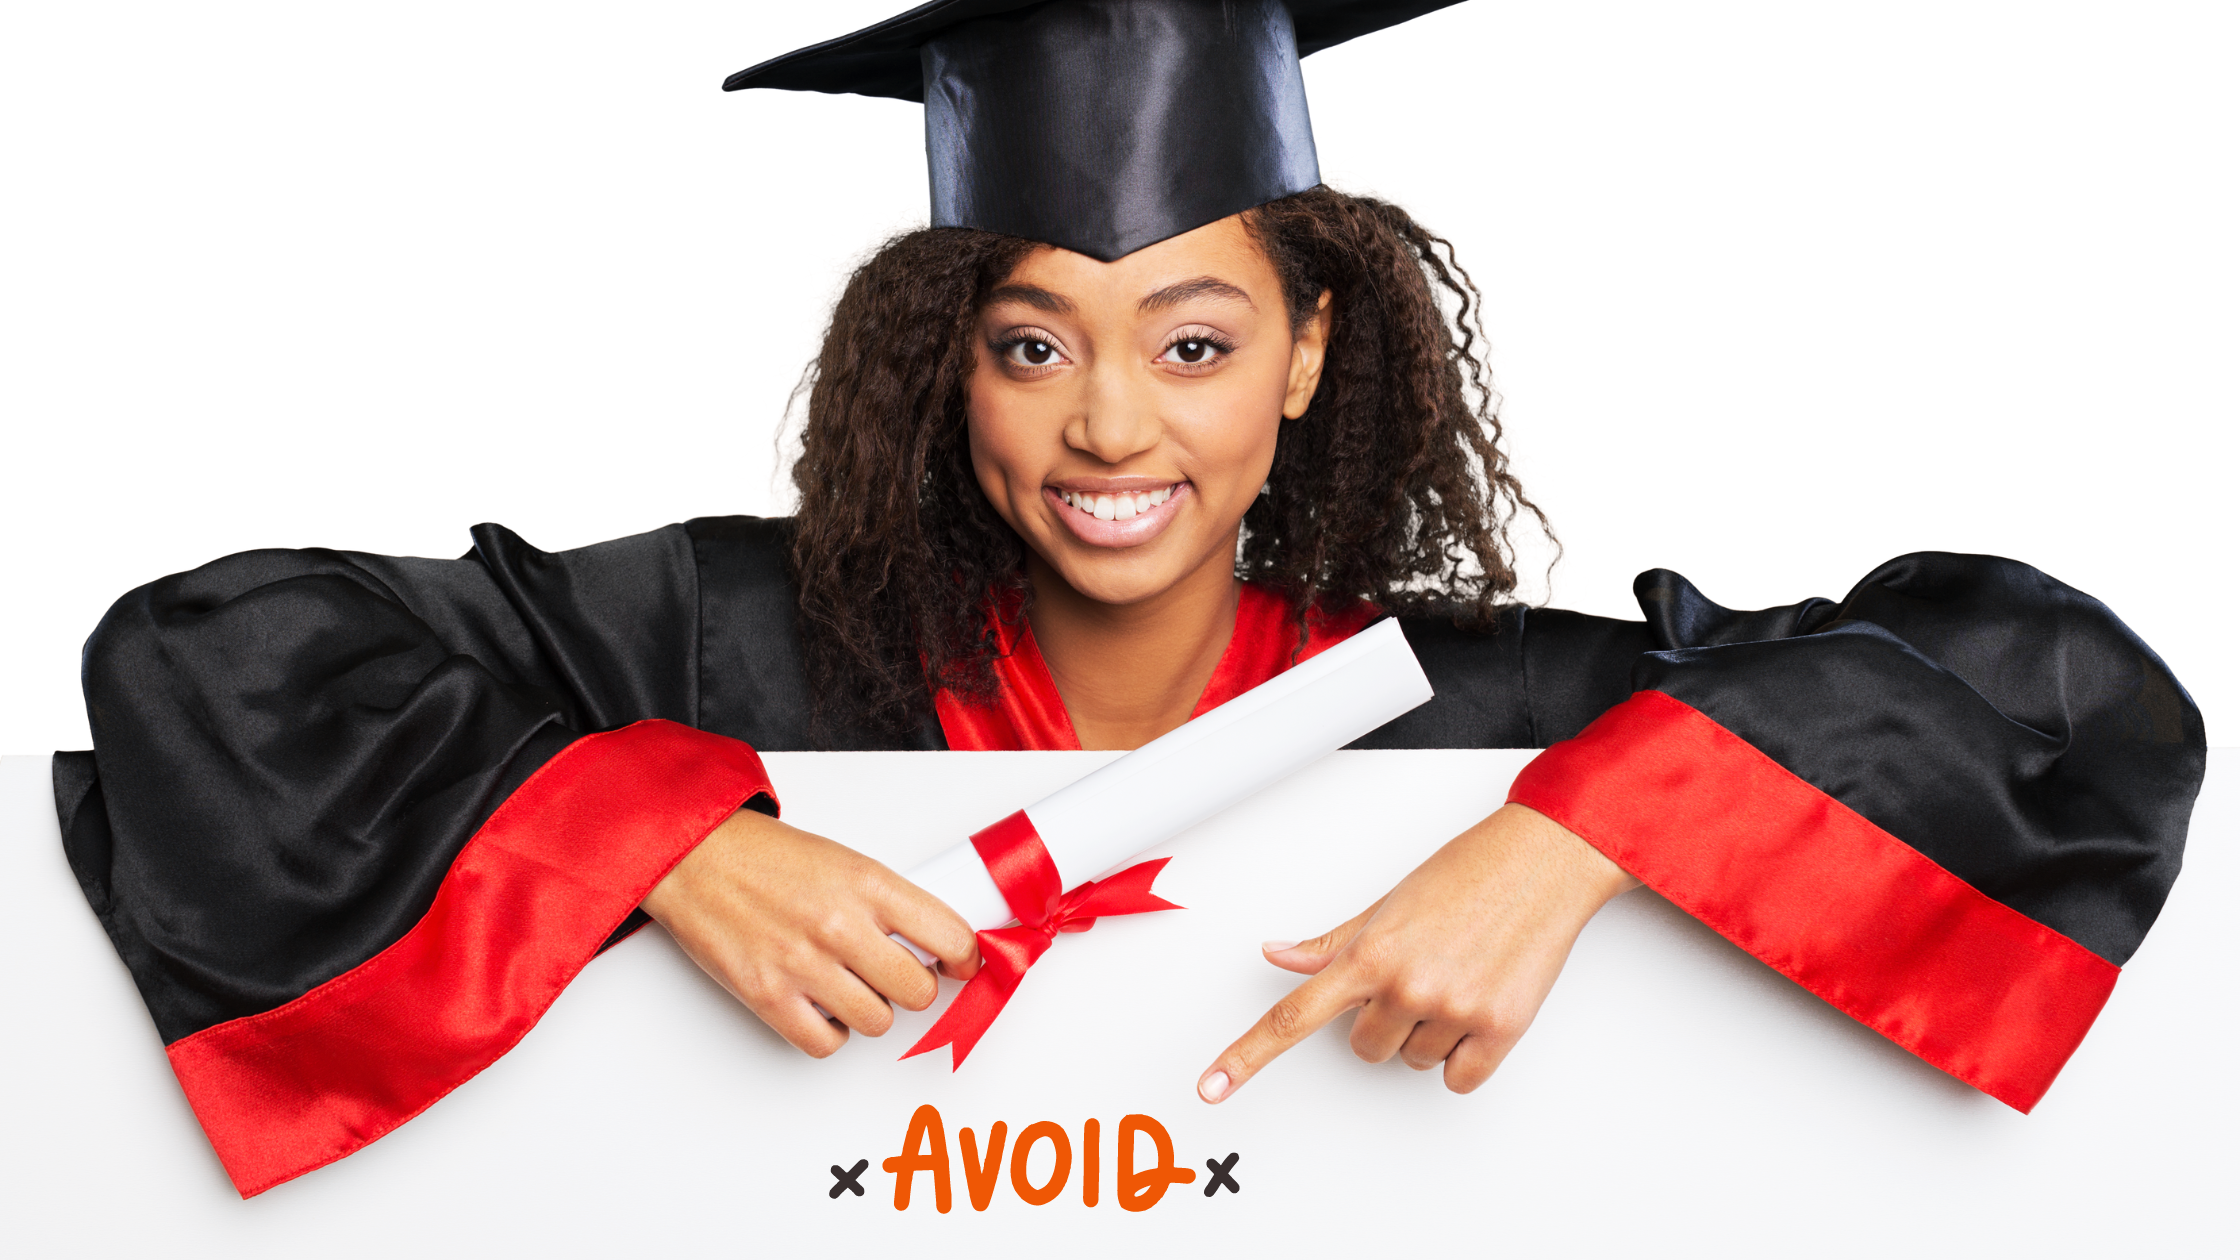 6 Things Should be avoided during Graduation speech